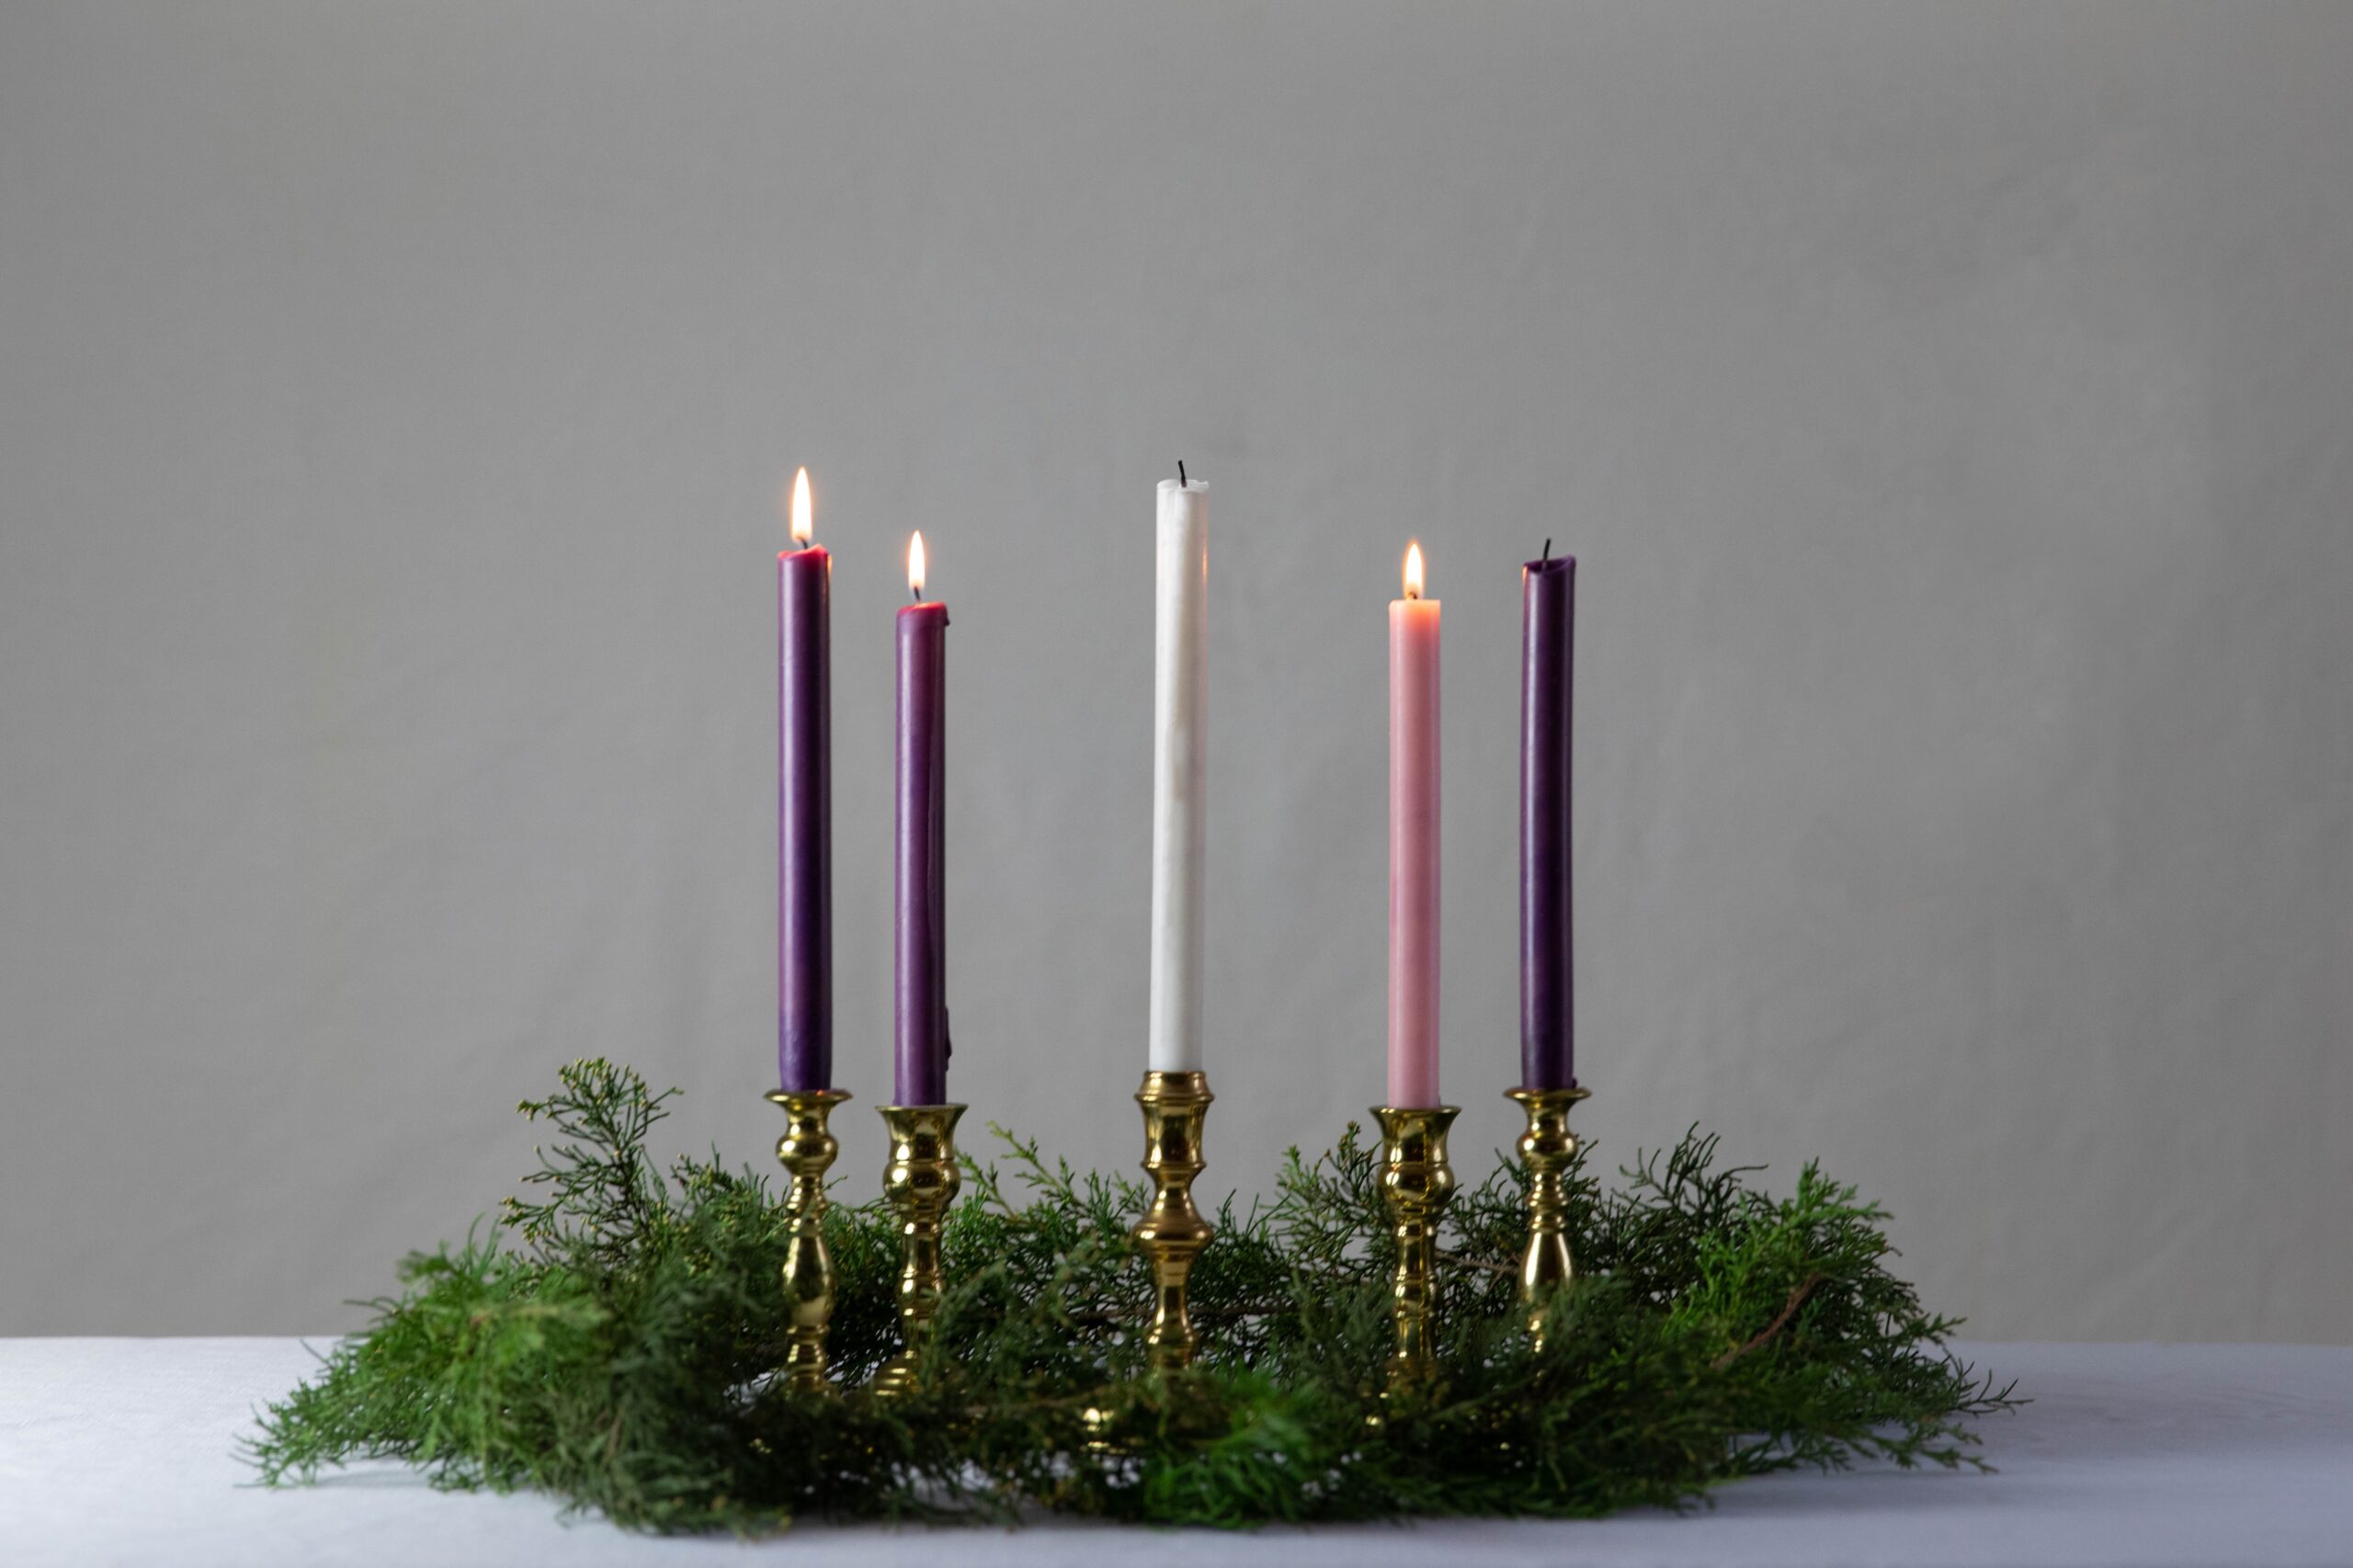 Advent wreath with greenry Three candles are lit, and two are not, including one tall white one in the center.